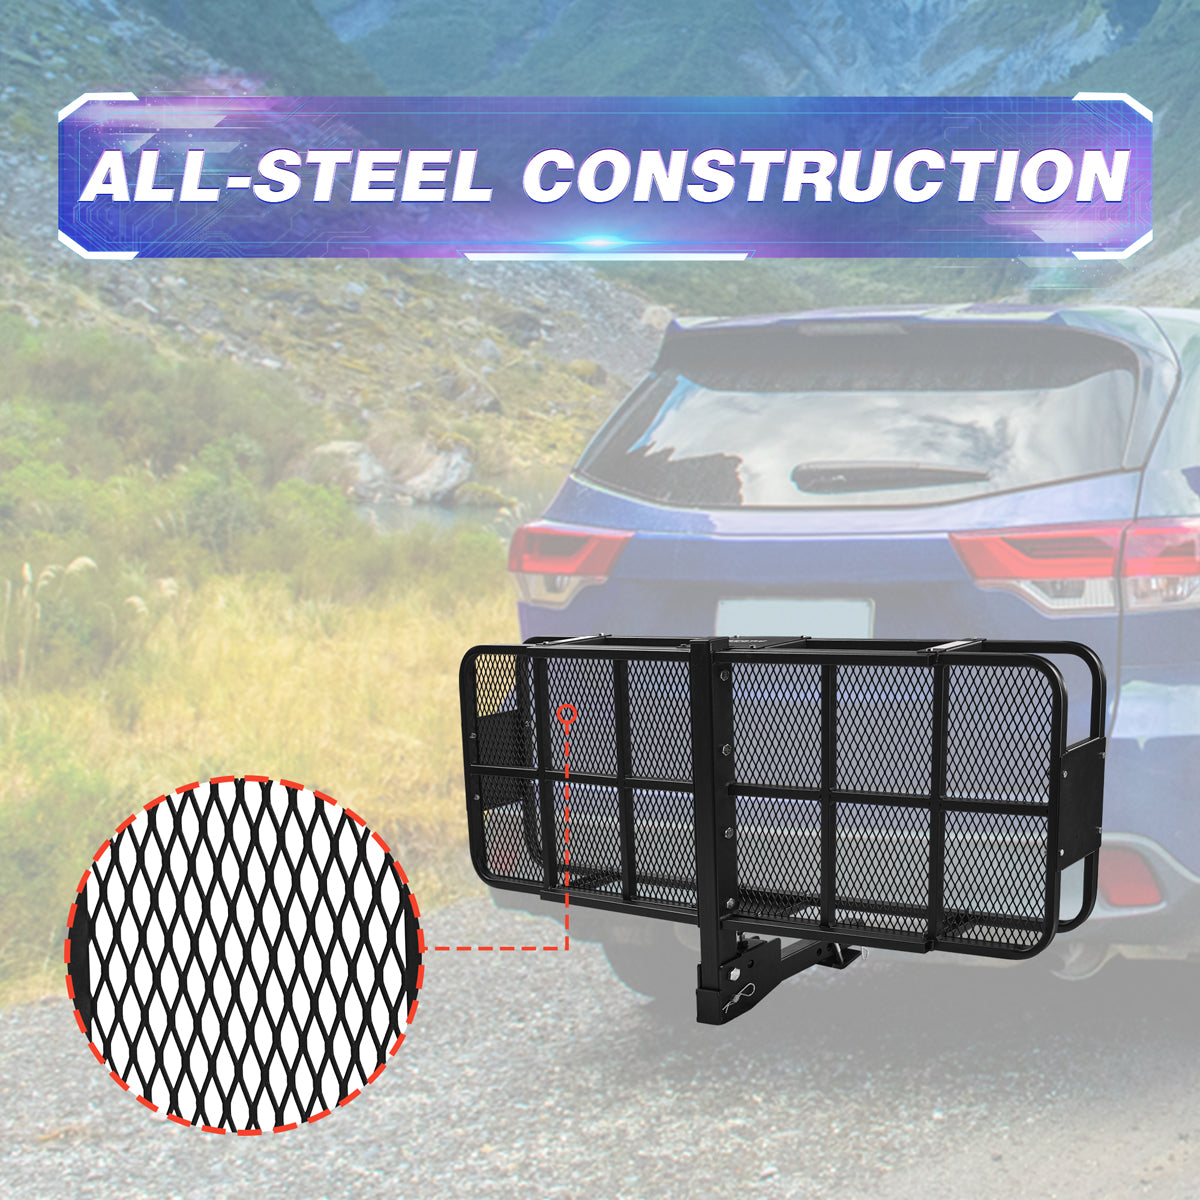 All-Steel Construction